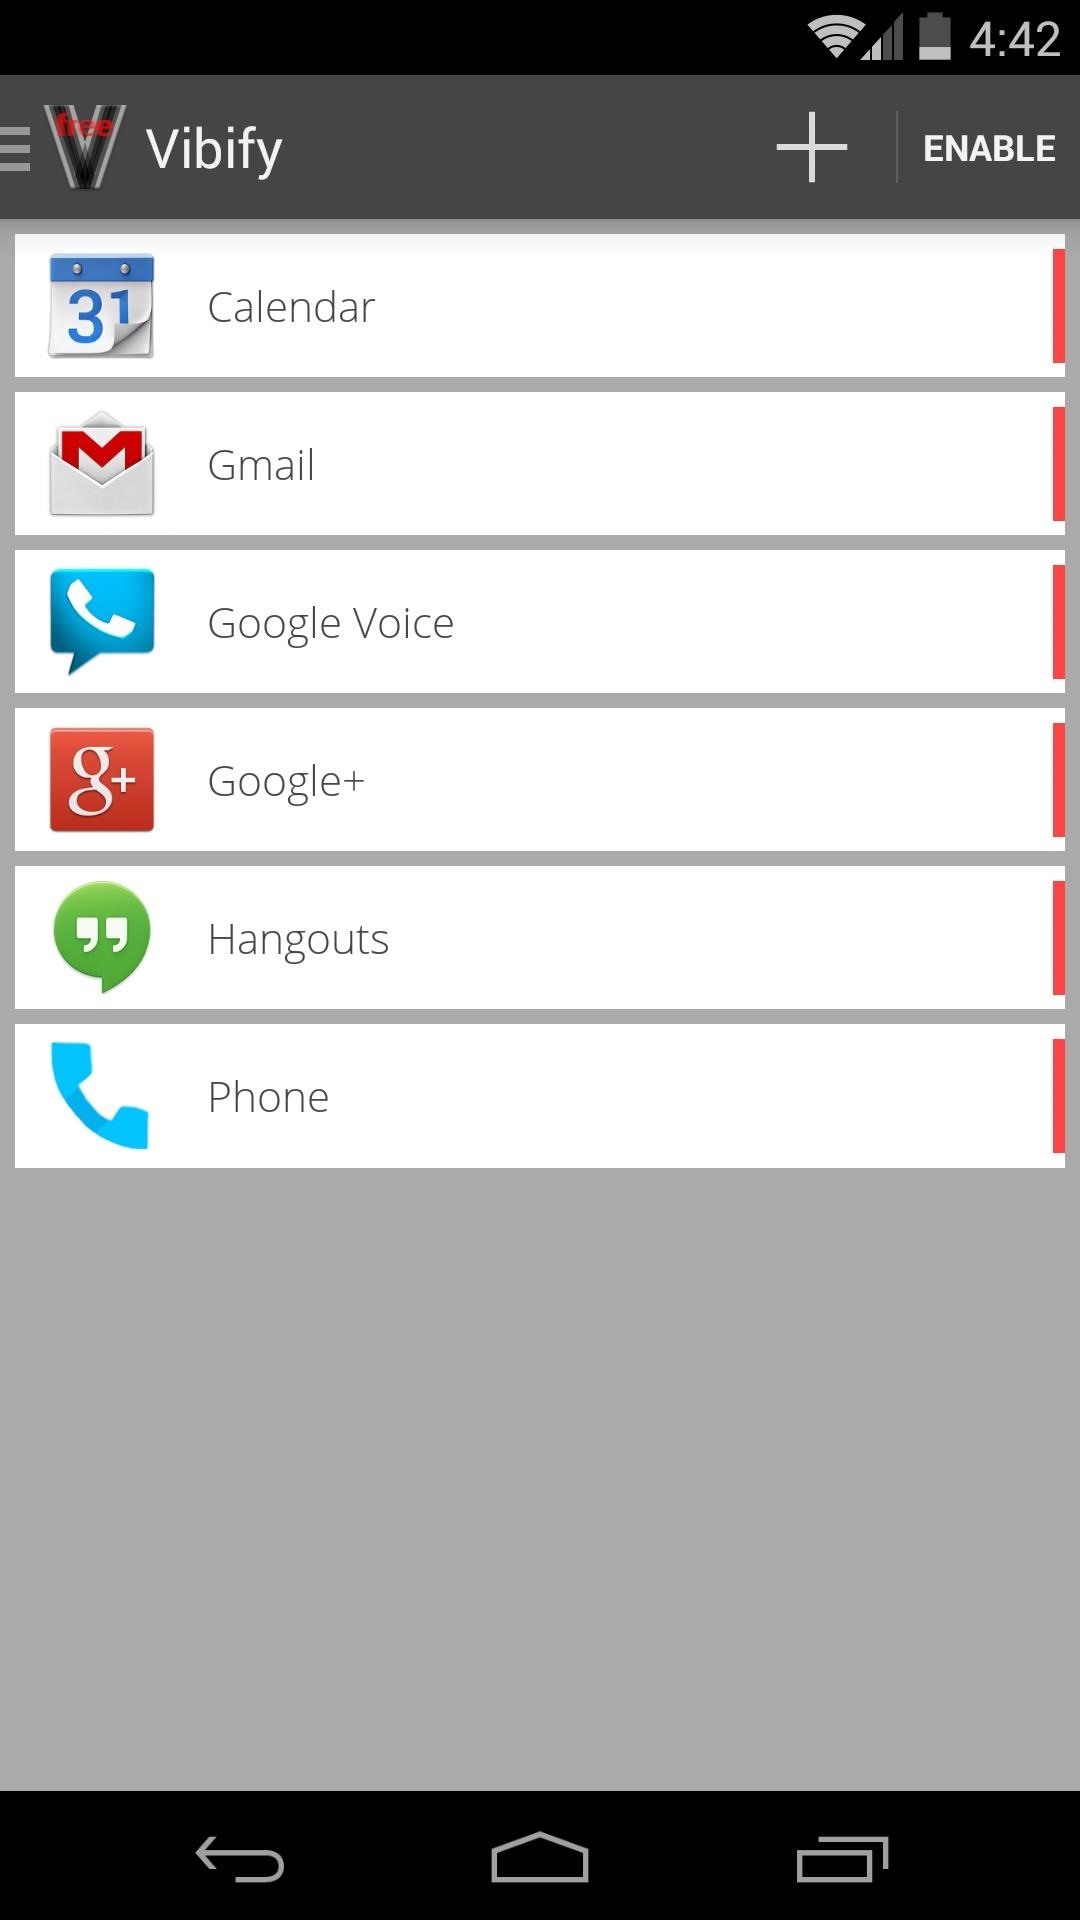 How to Get the Samsung Galaxy "Smart Alert" Feature on Your Nexus 5 or Other Android Phone